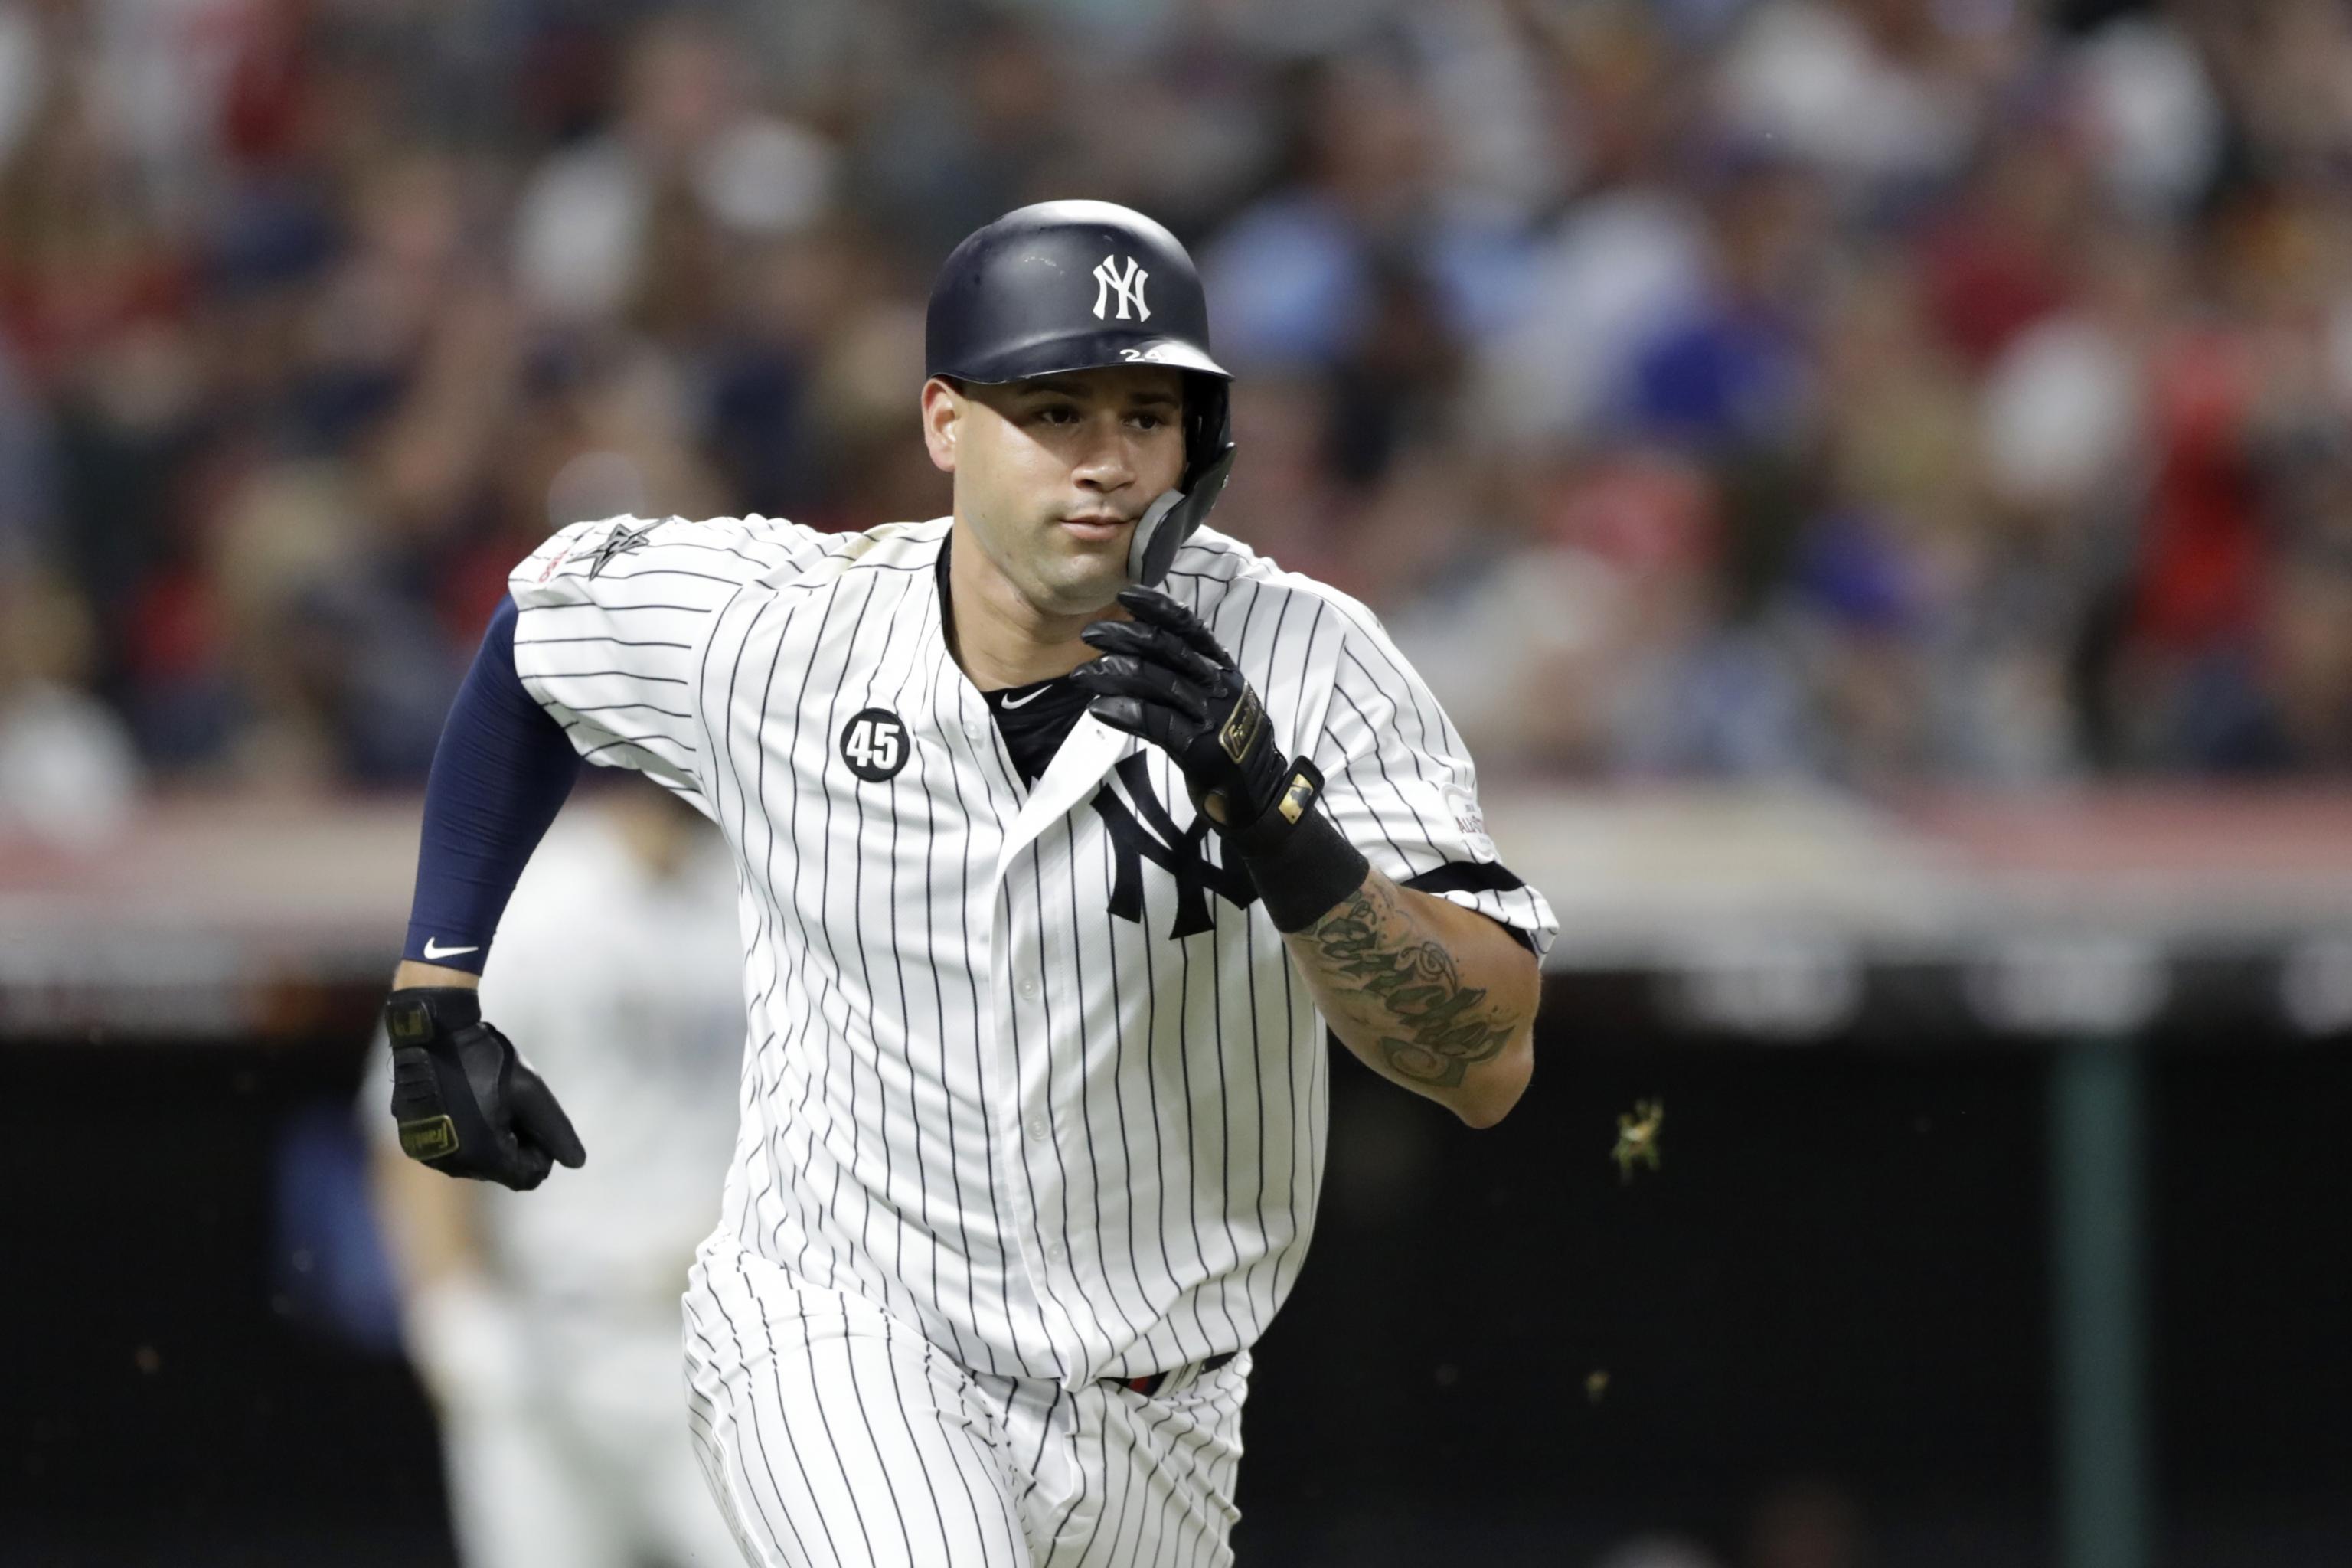 Gary Sanchez injury update: Yankees catcher (groin) hopes to